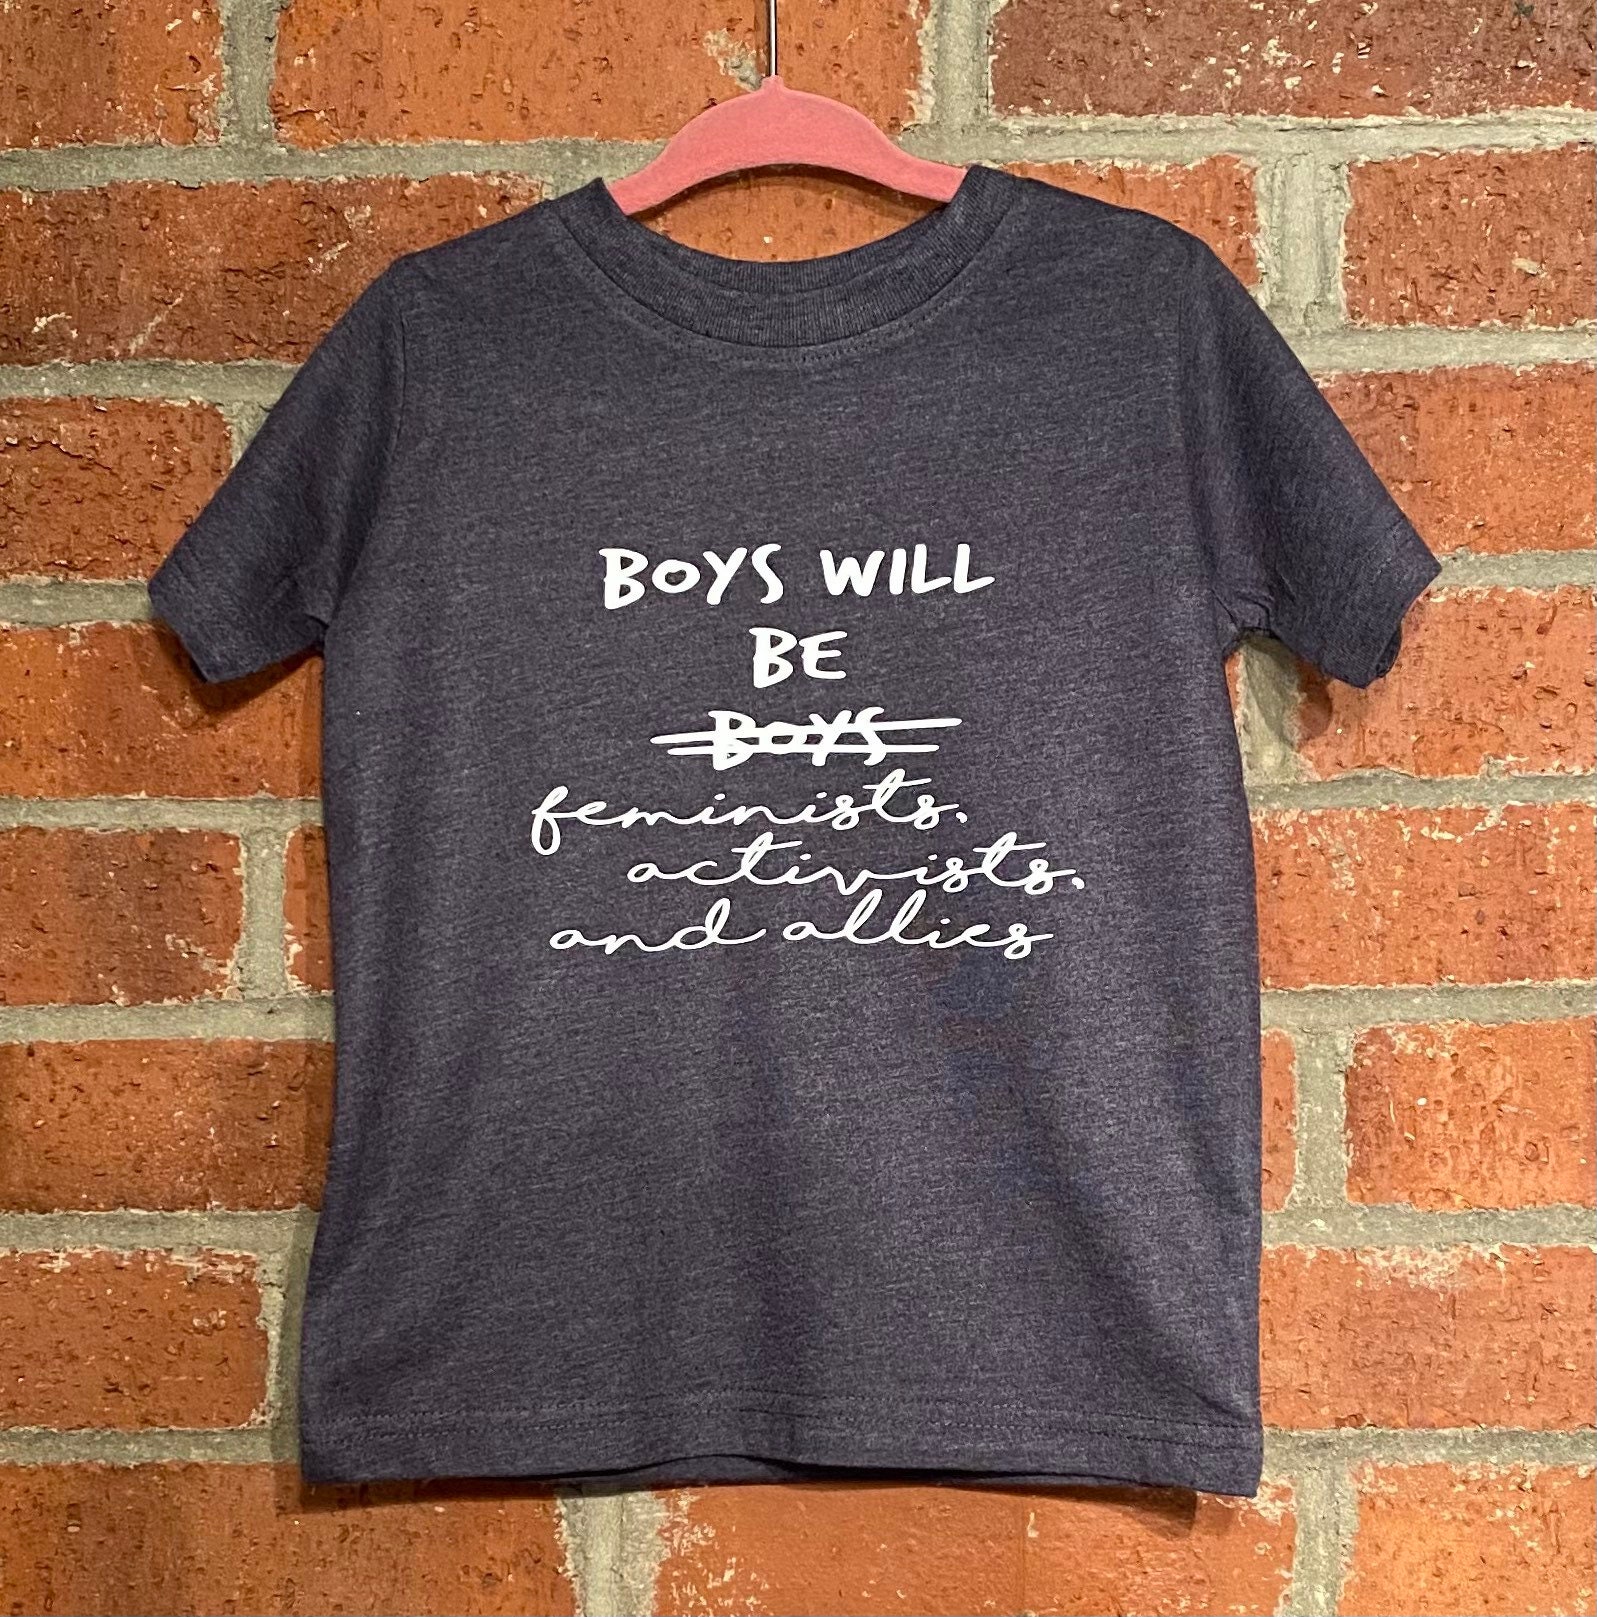 Feminist Unisex Kids T-Shirt Boys Will Be Boys Quote Cotton | Etsy